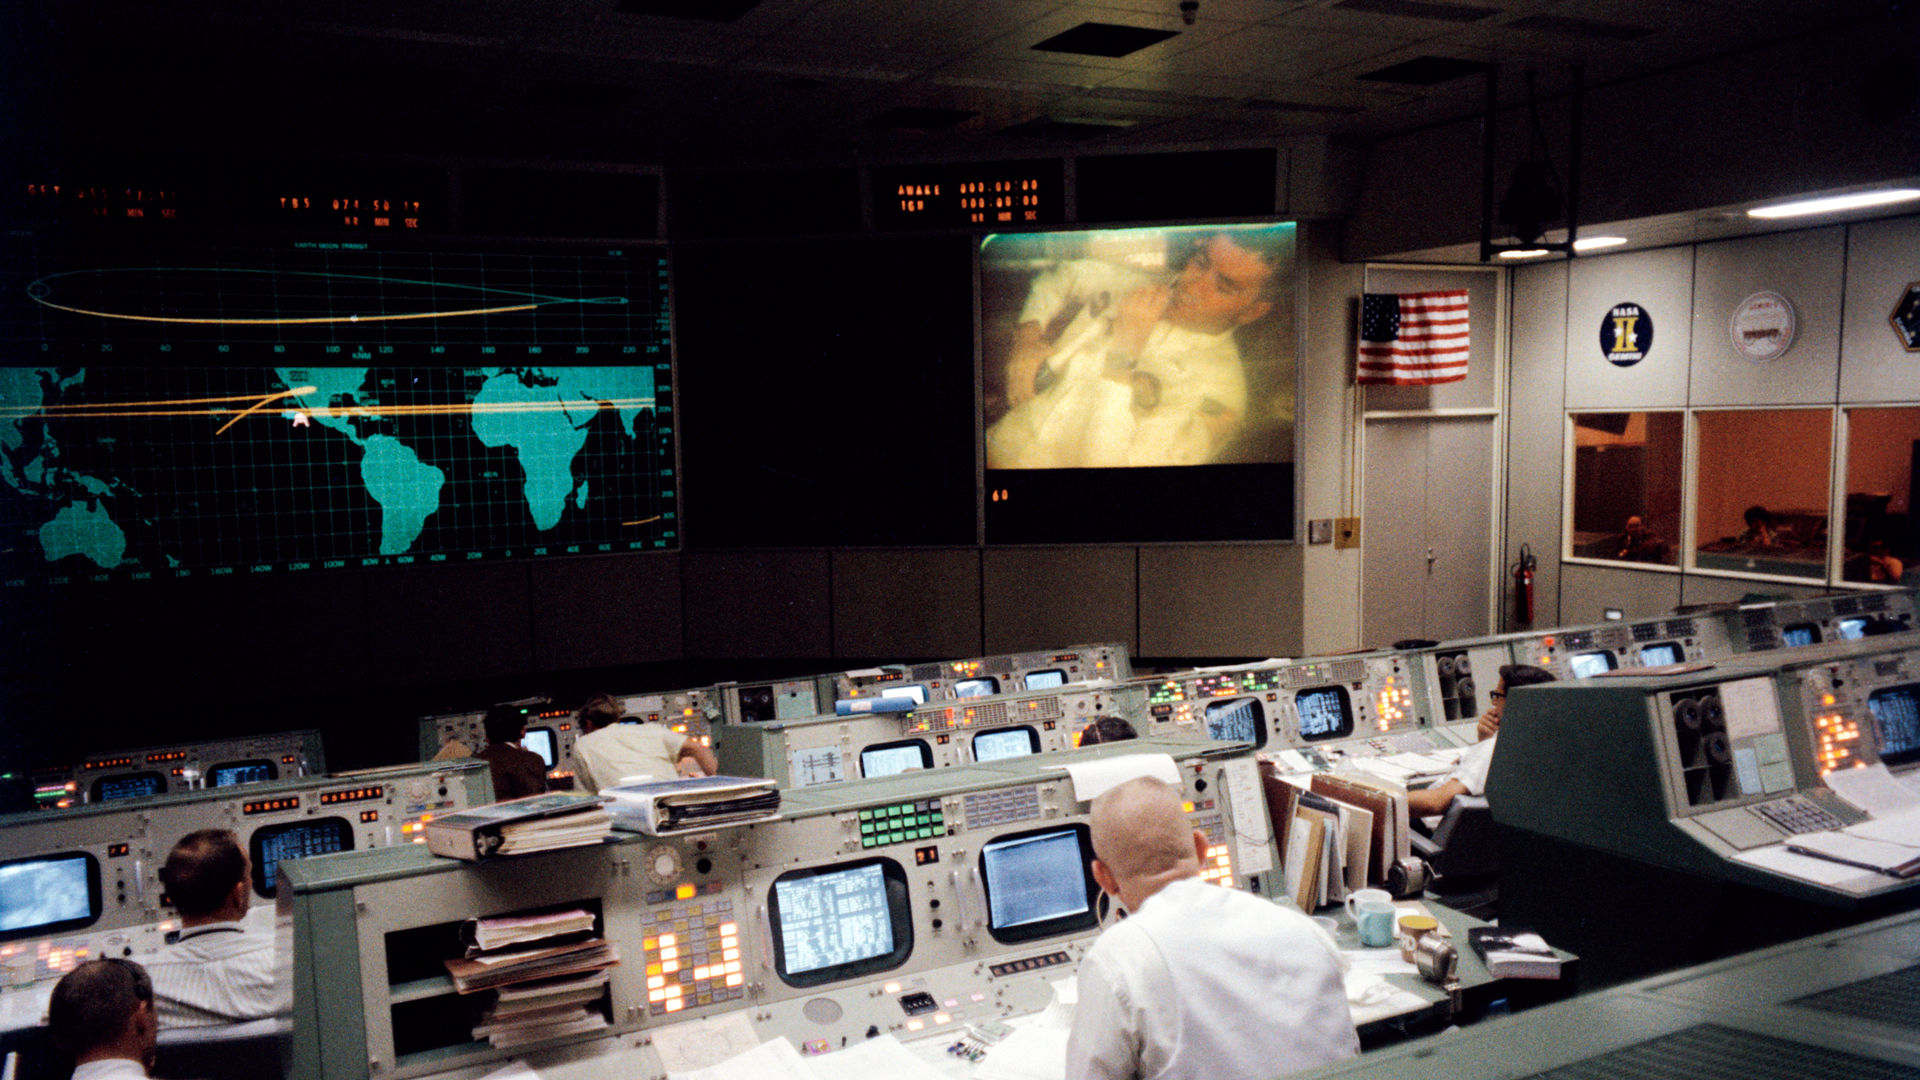 What Went Wrong on Apollo 13?